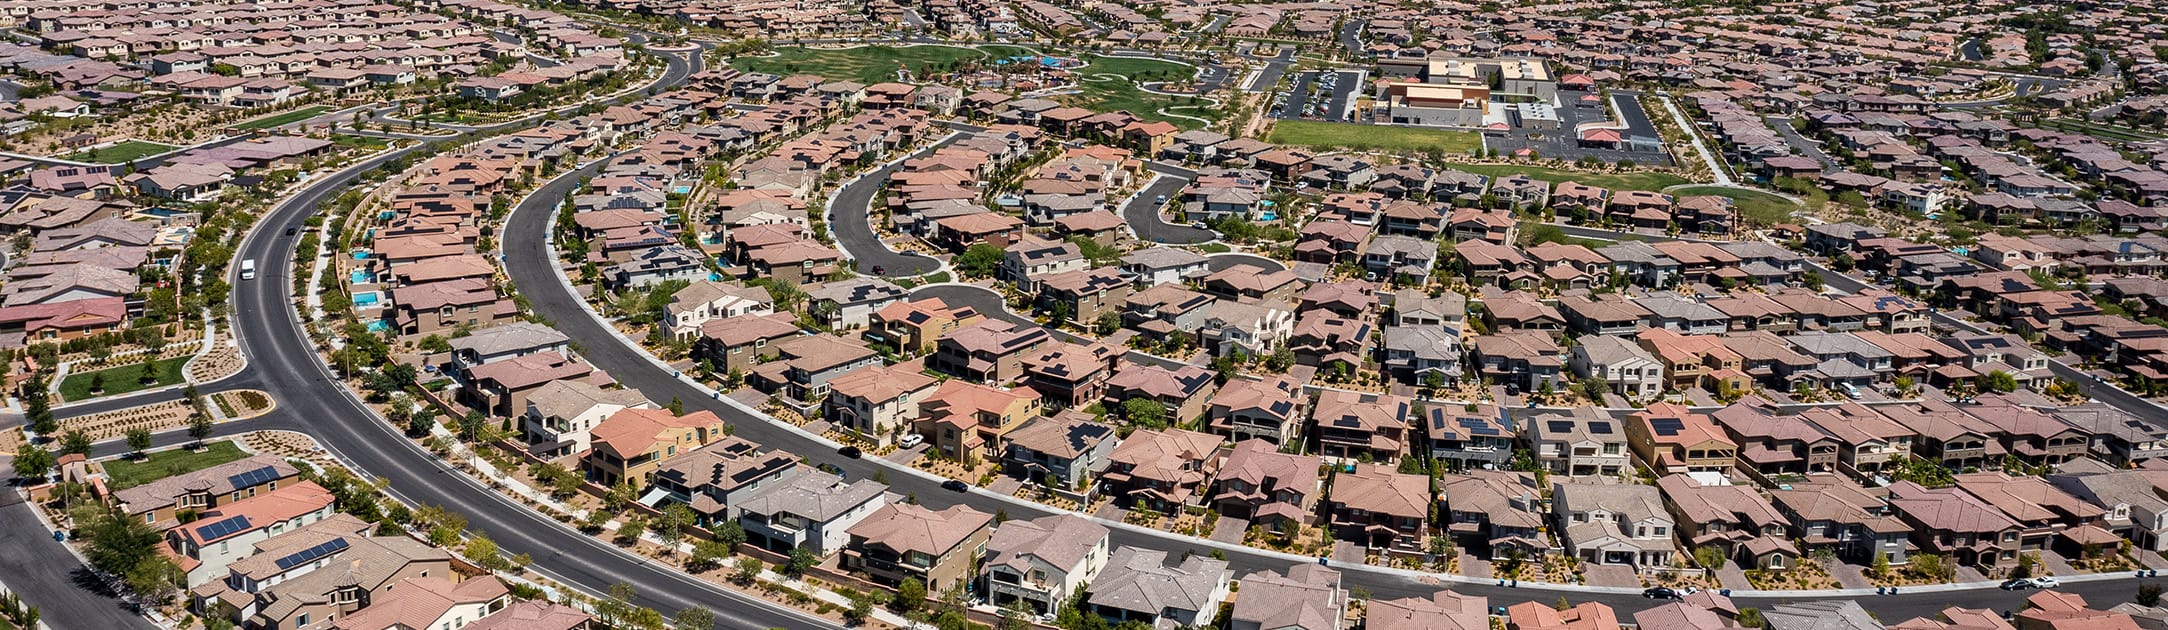 Aerial view of neighborhood with curved streets.